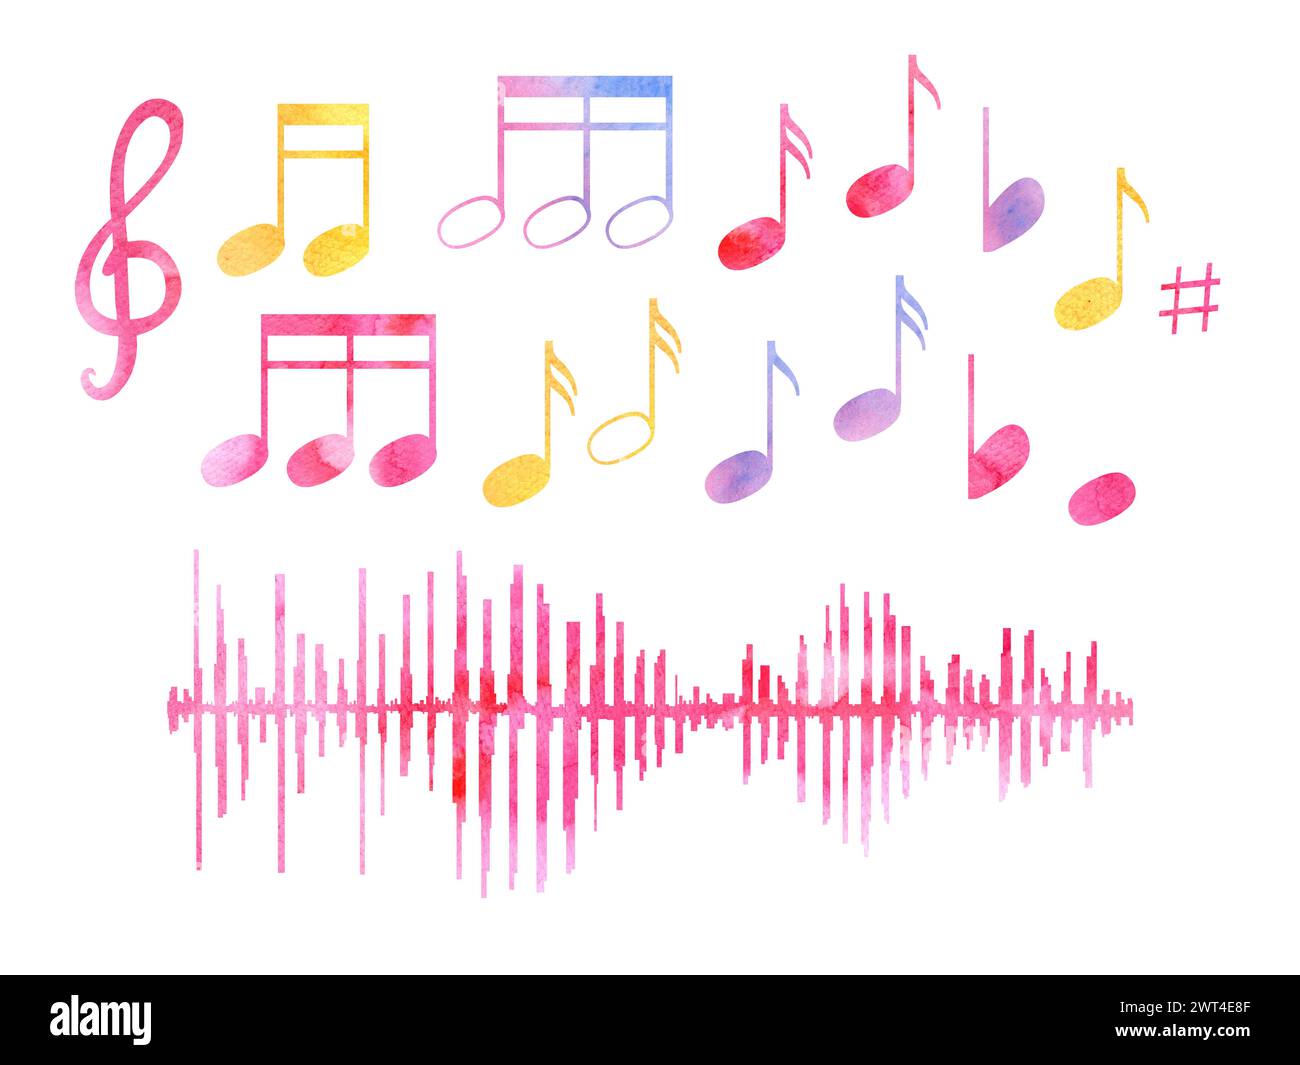 Watercolor music notes and equalizer wave in sketch style. Multicolored music elements, sound waves. Audio, signal, voice recording. Stock Photo